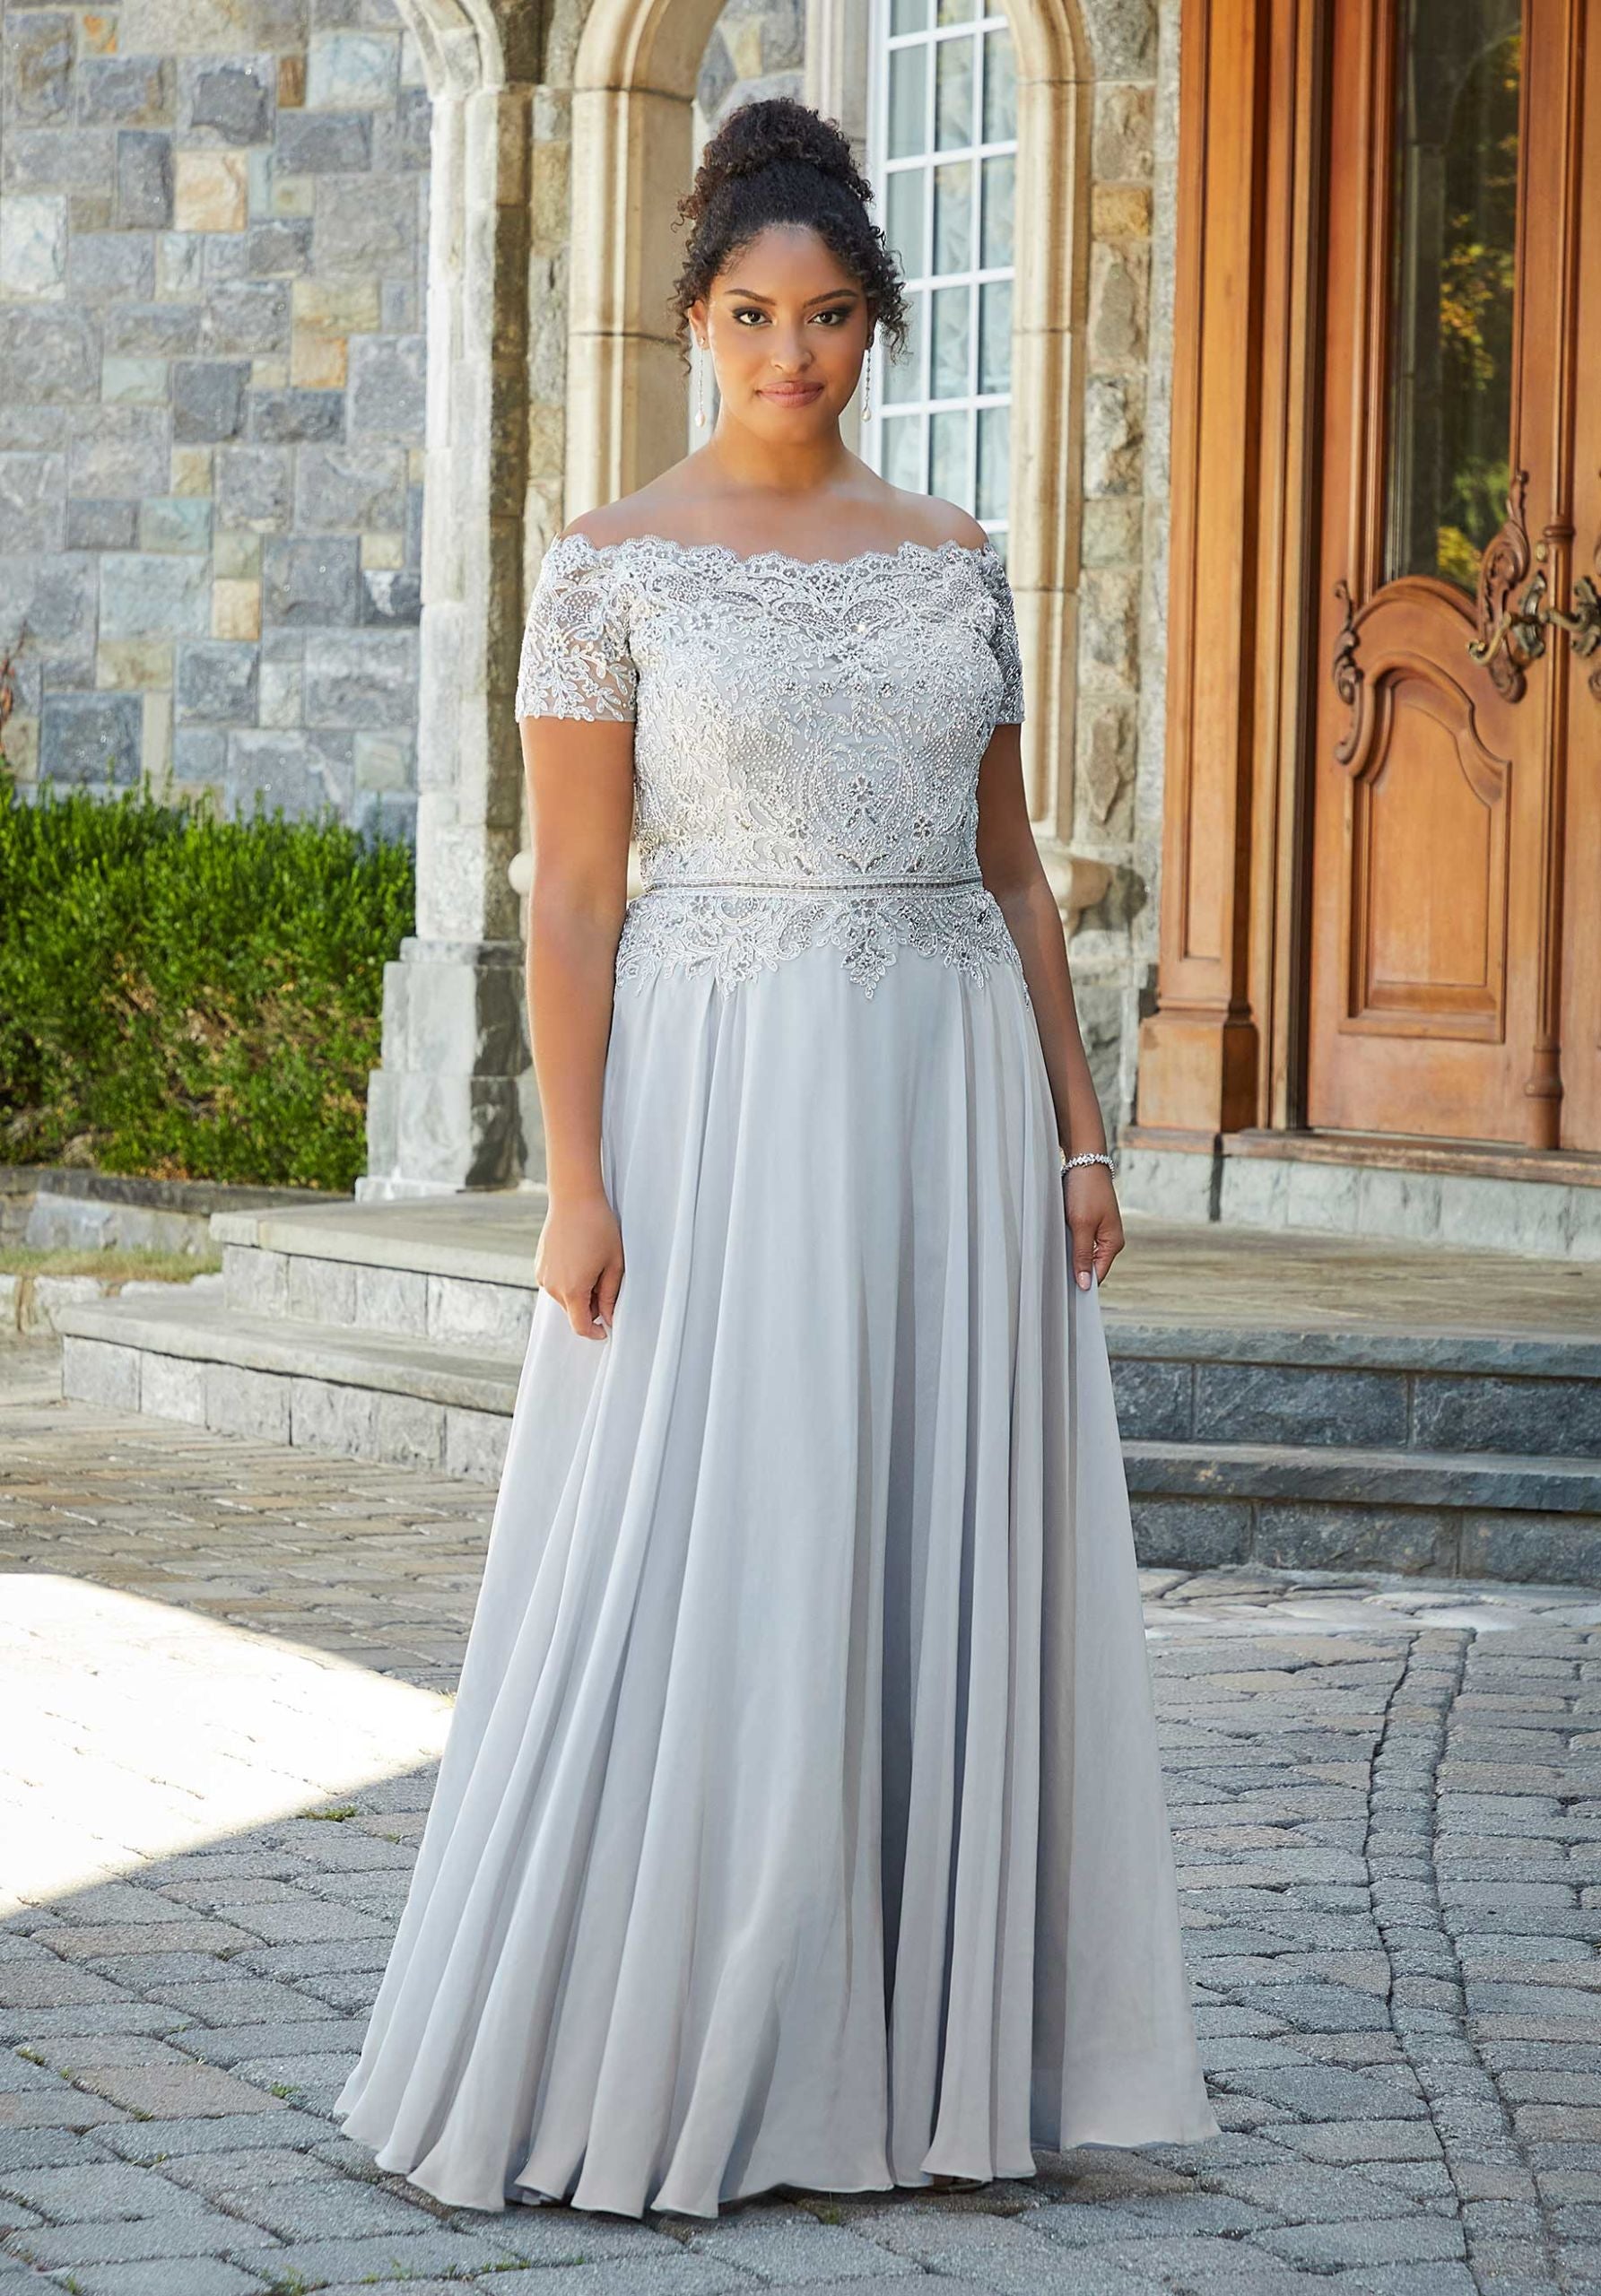 Plus Size Floor Length Formal Evening Gowns for Weddings - Ever